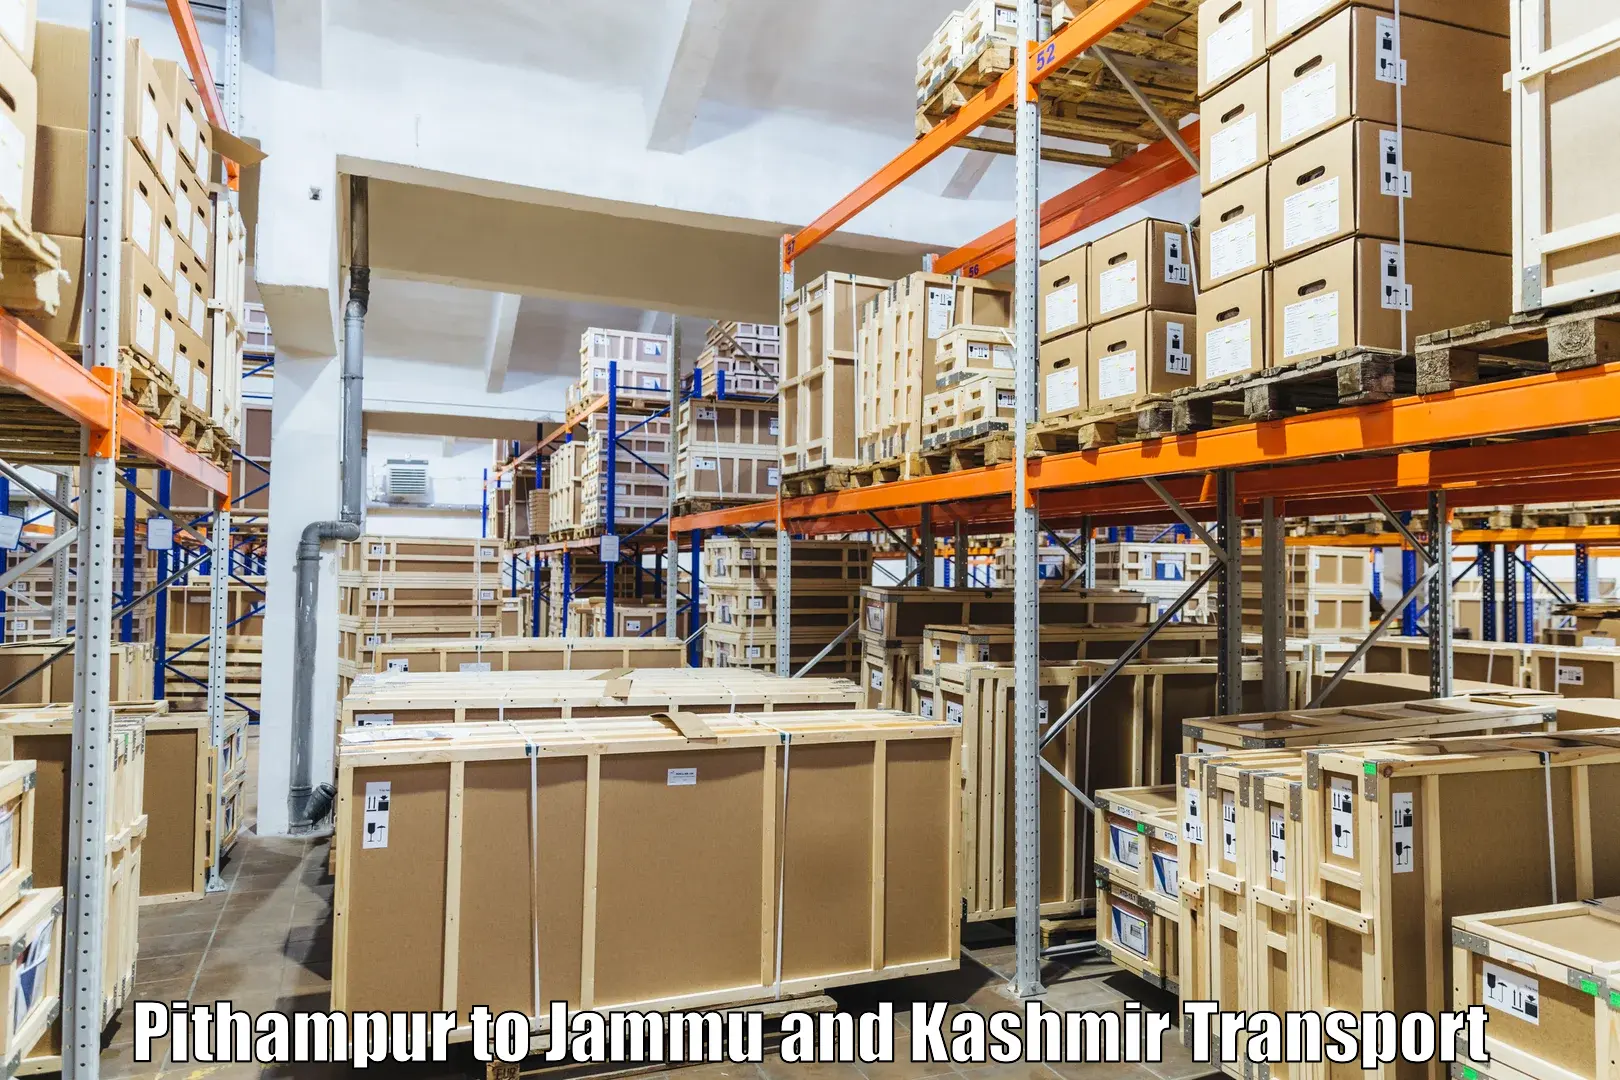 Express transport services in Pithampur to Anantnag